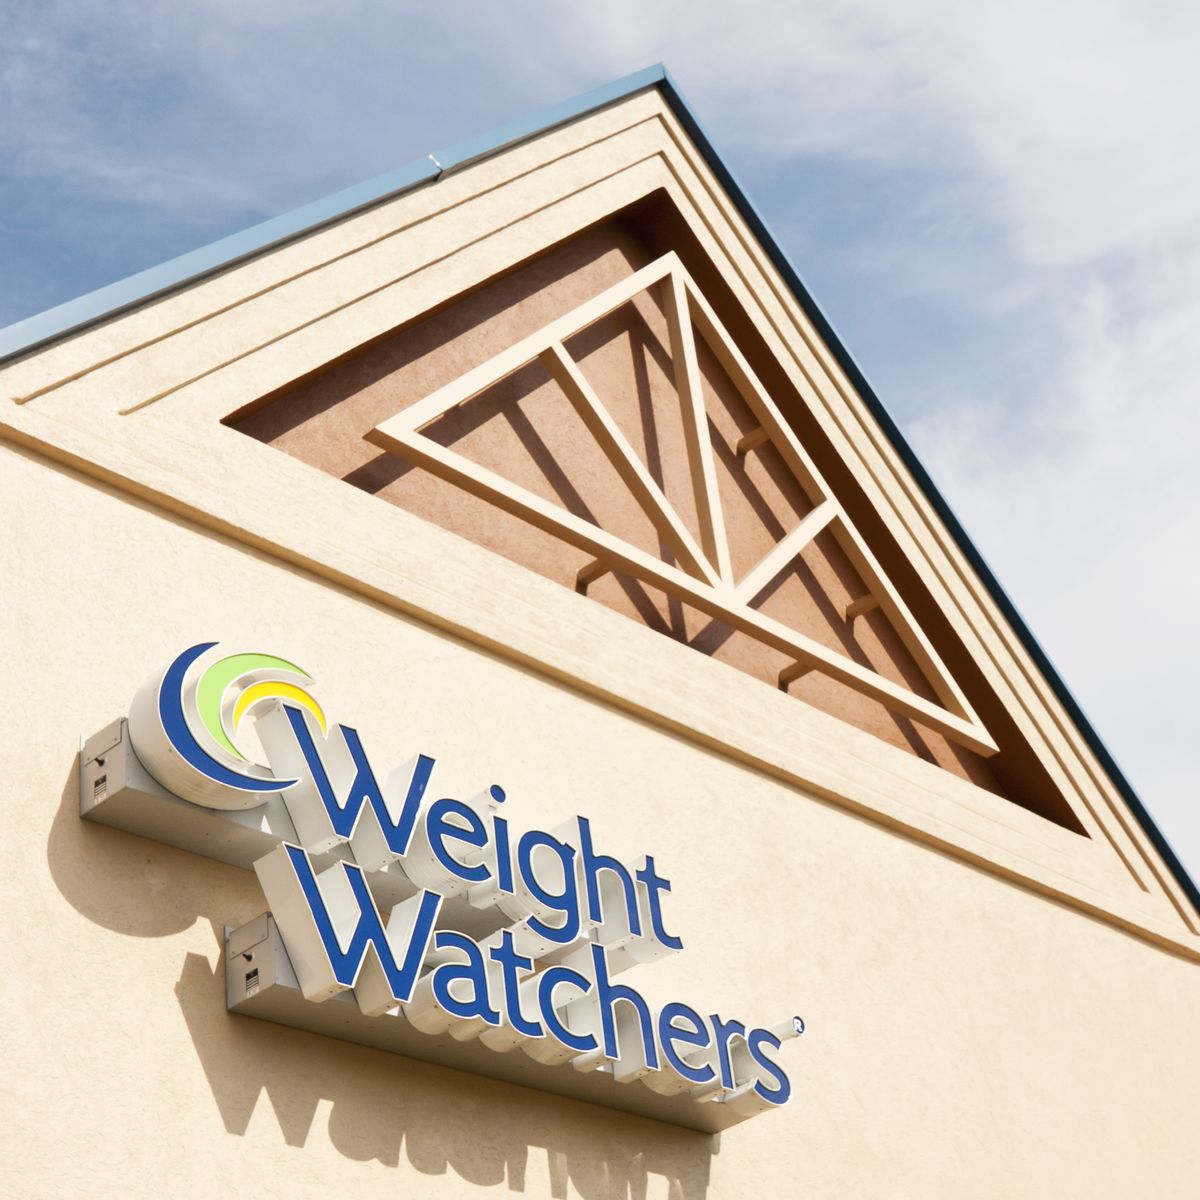 Weight Watchers drops 'weight' from name - BBC News